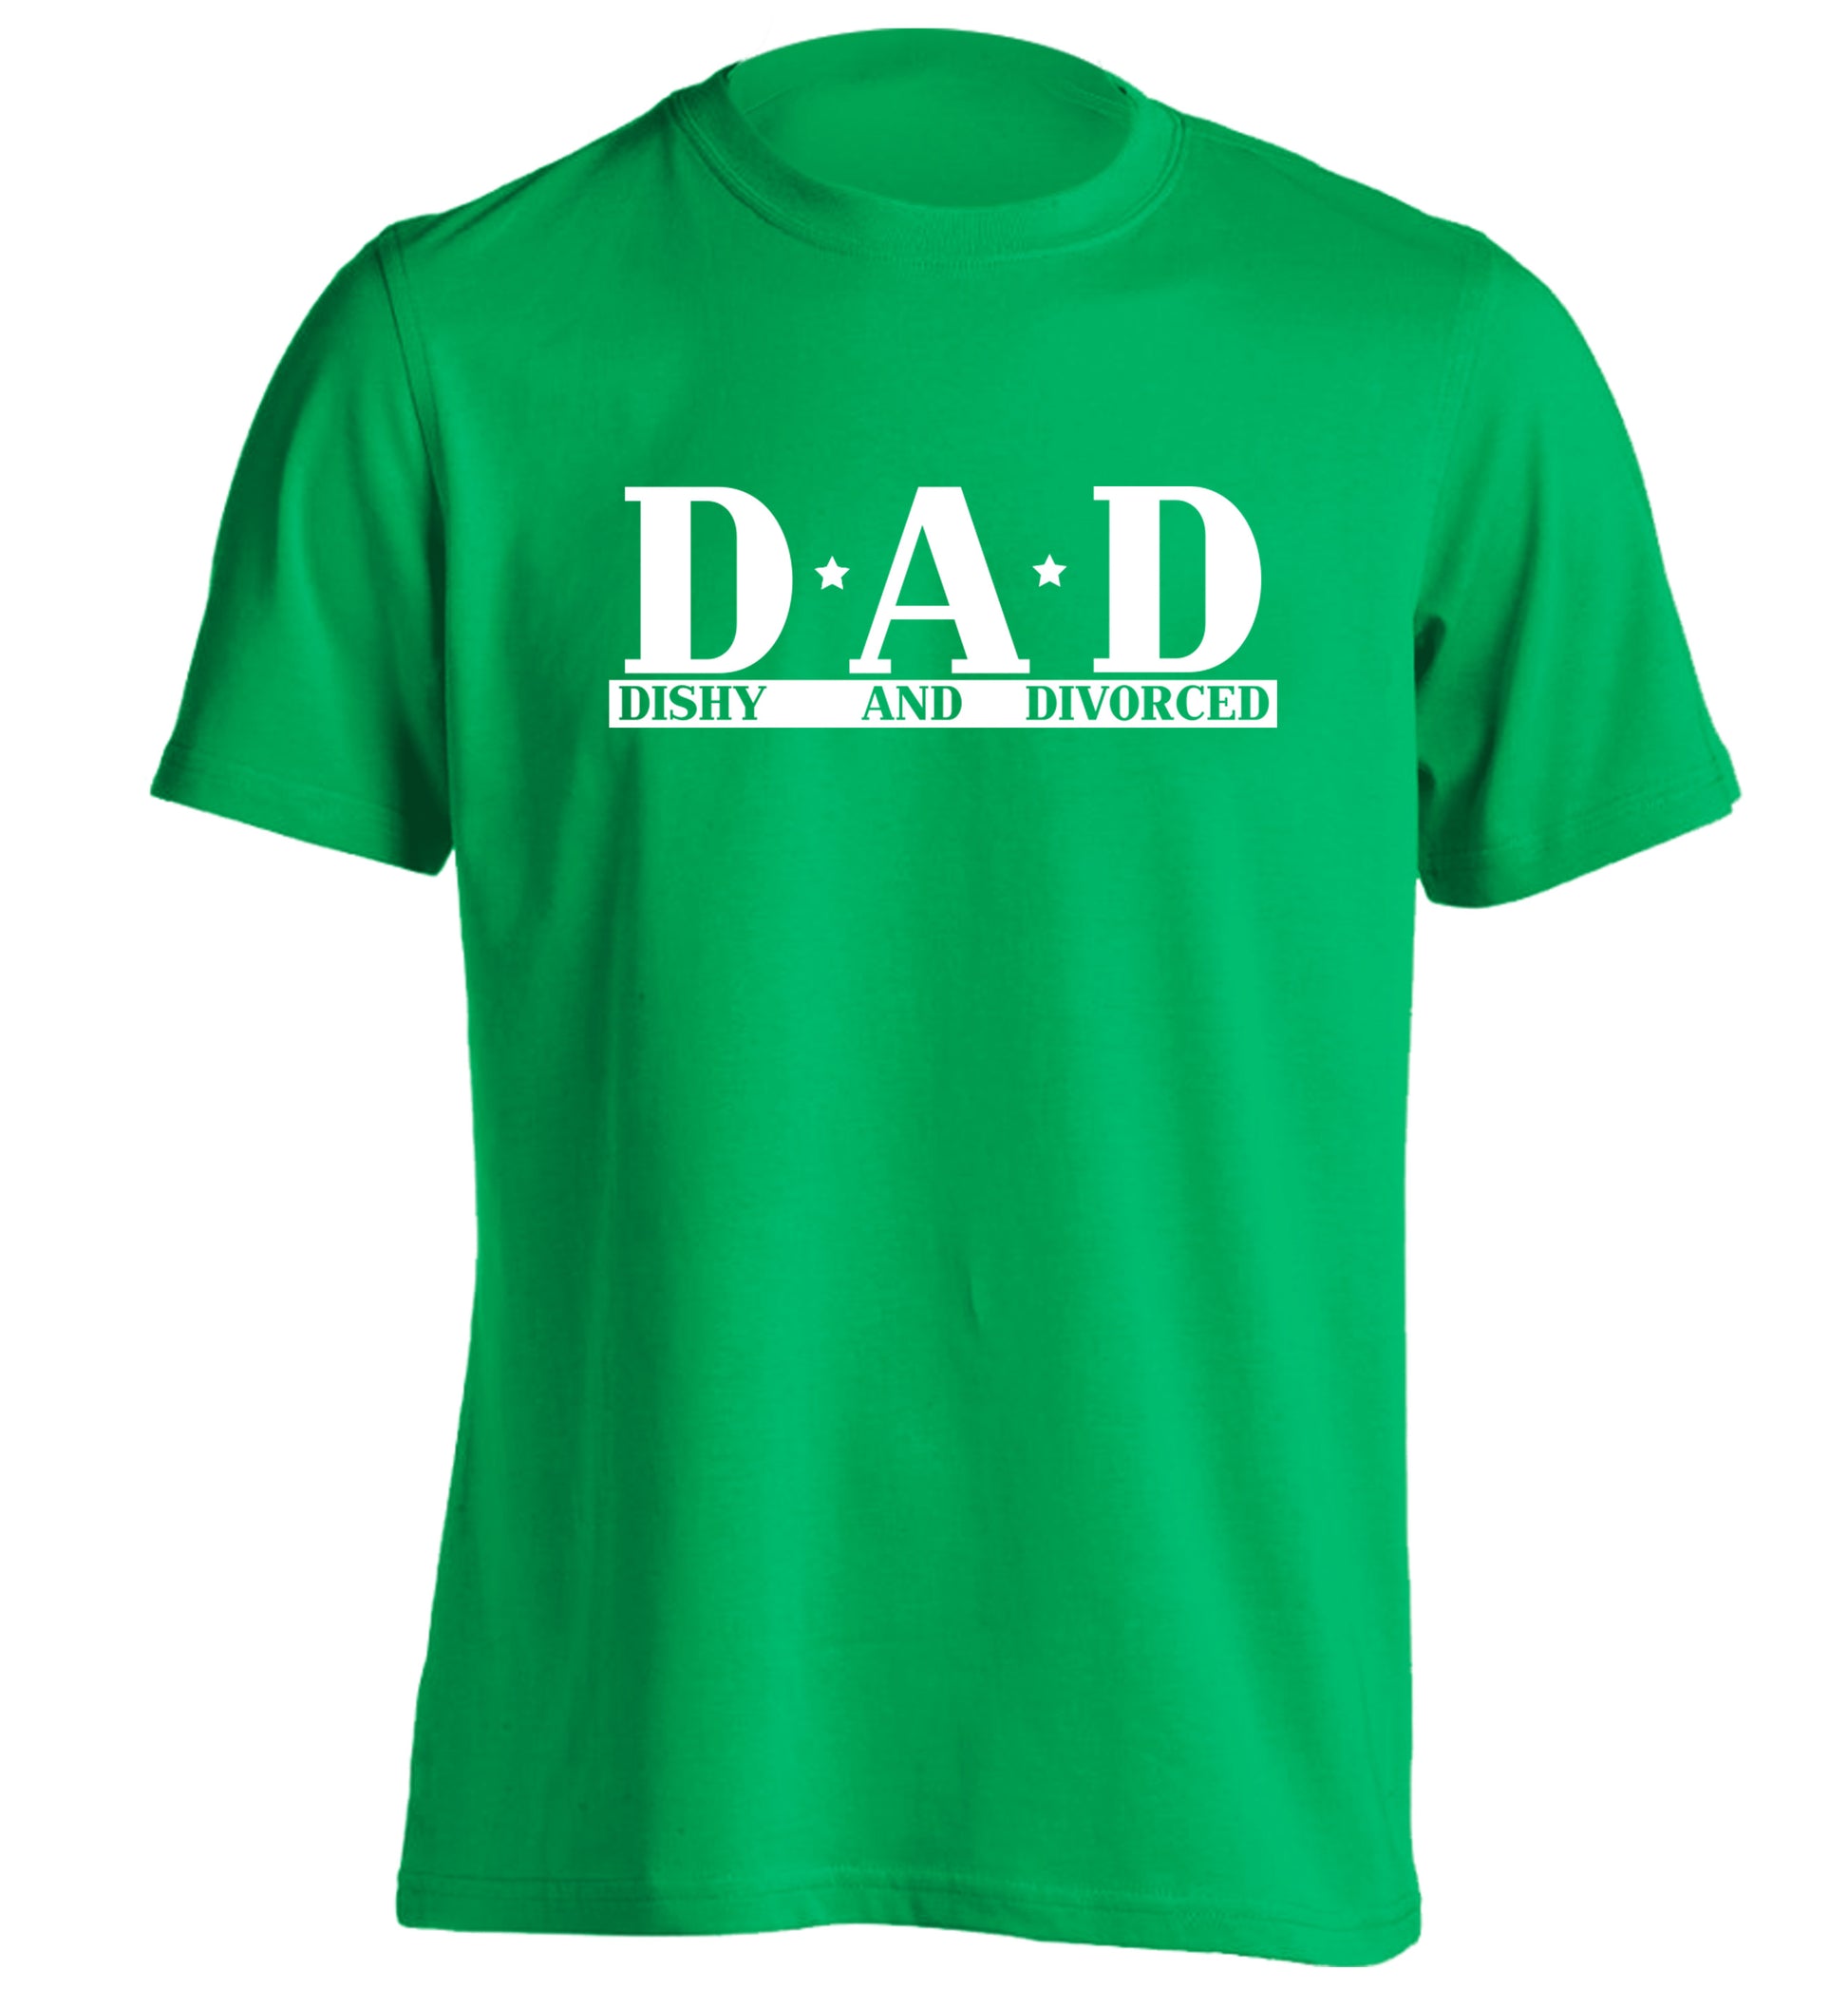 D.A.D meaning Dishy and Divorced adults unisex green Tshirt 2XL